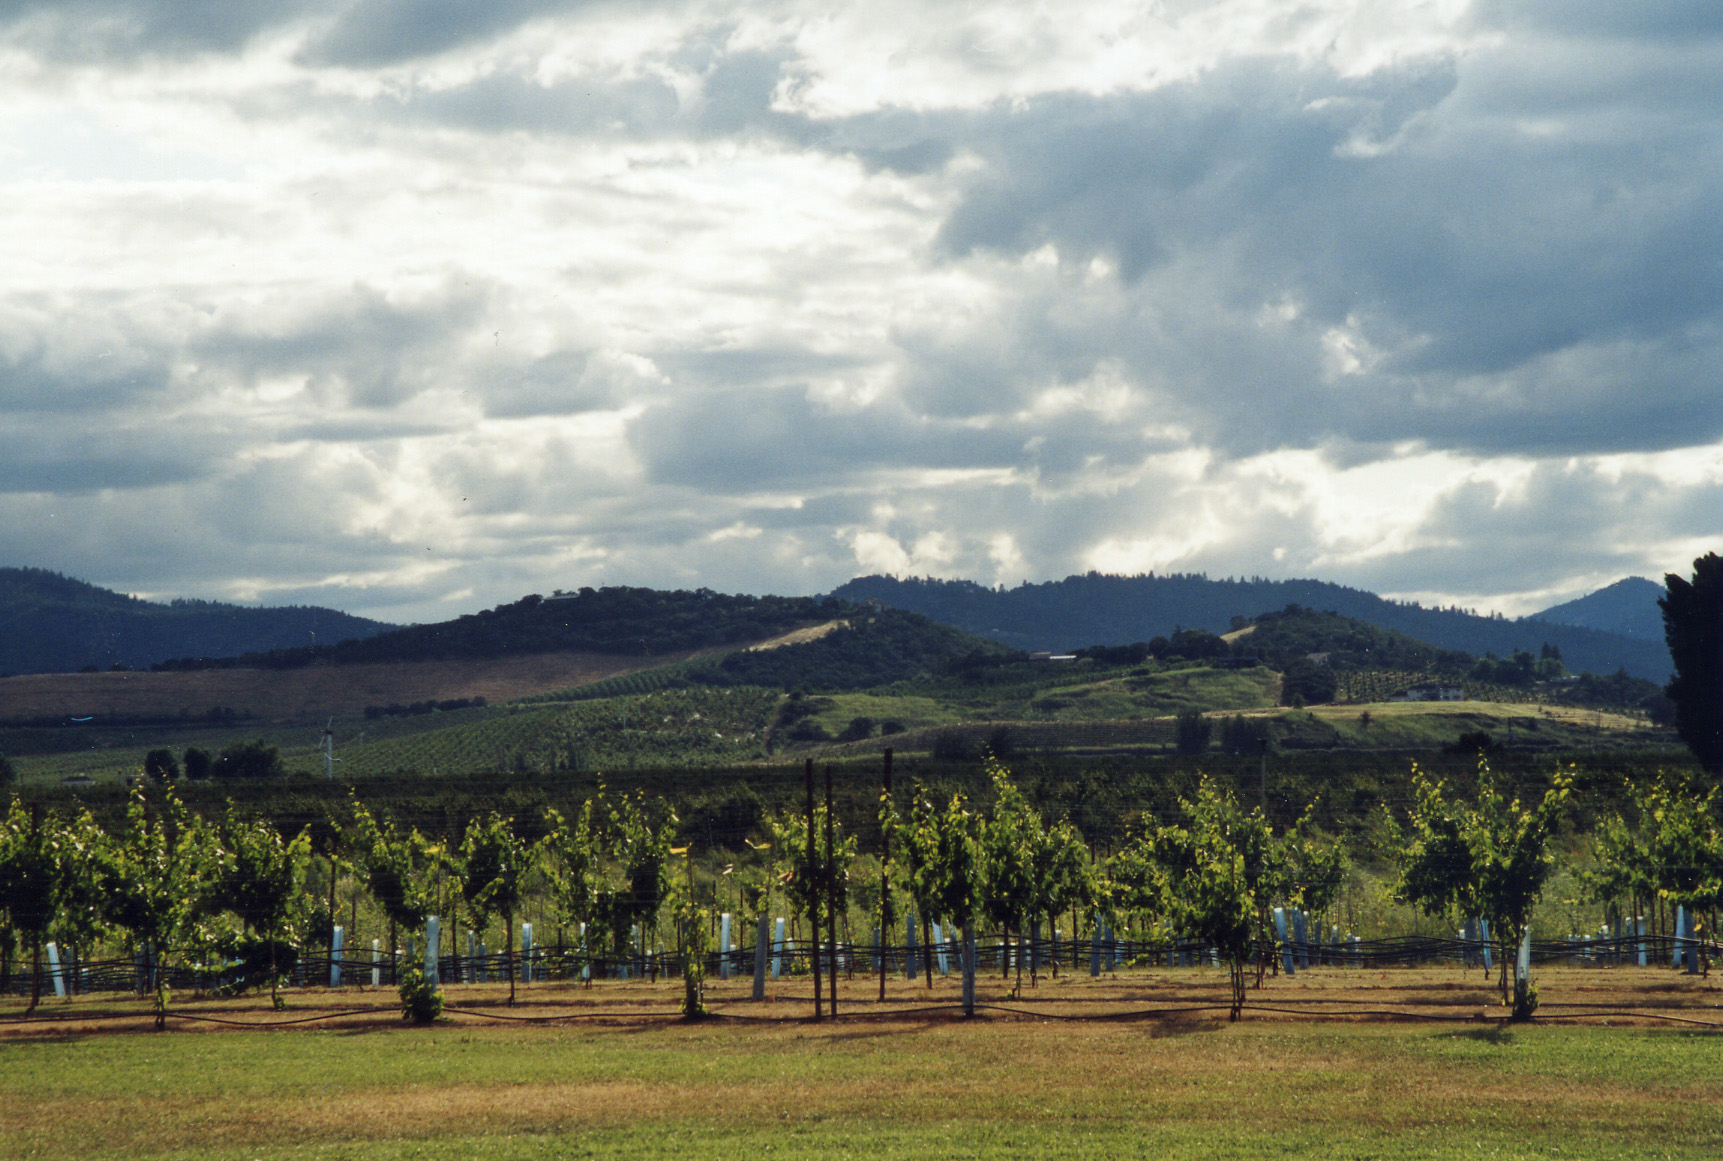 vineyard with hills in background and cloudy sky